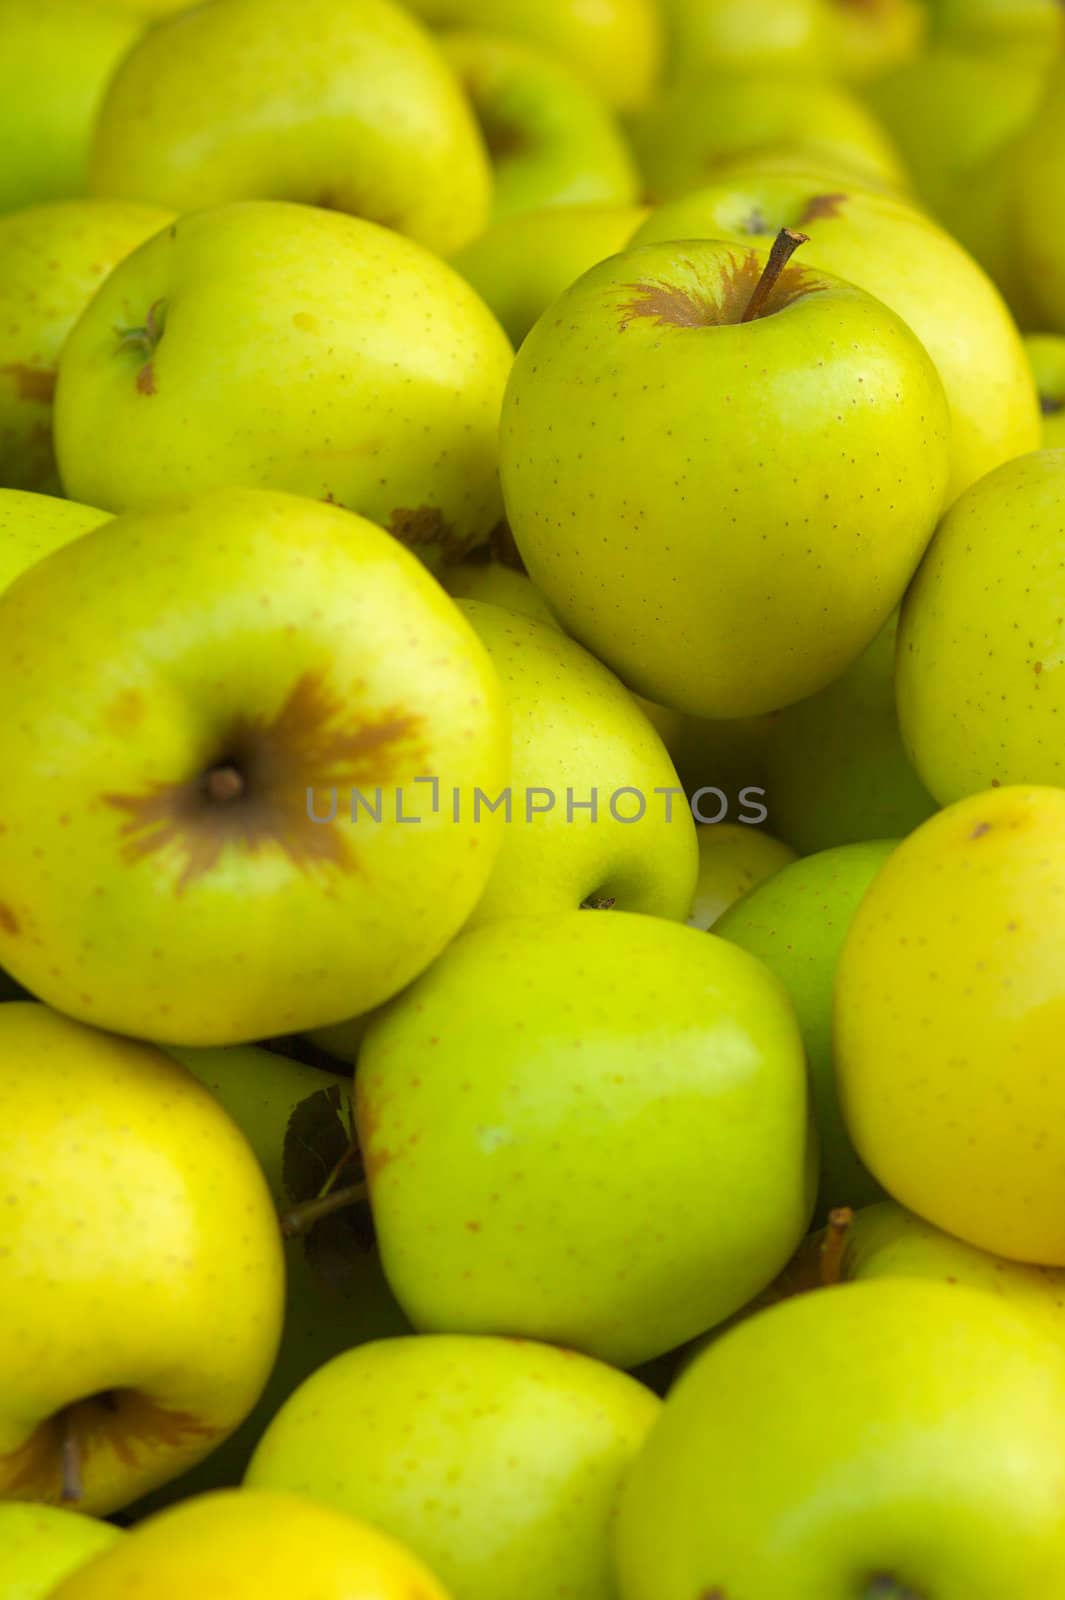 Goldent Delicious Apples by bobkeenan